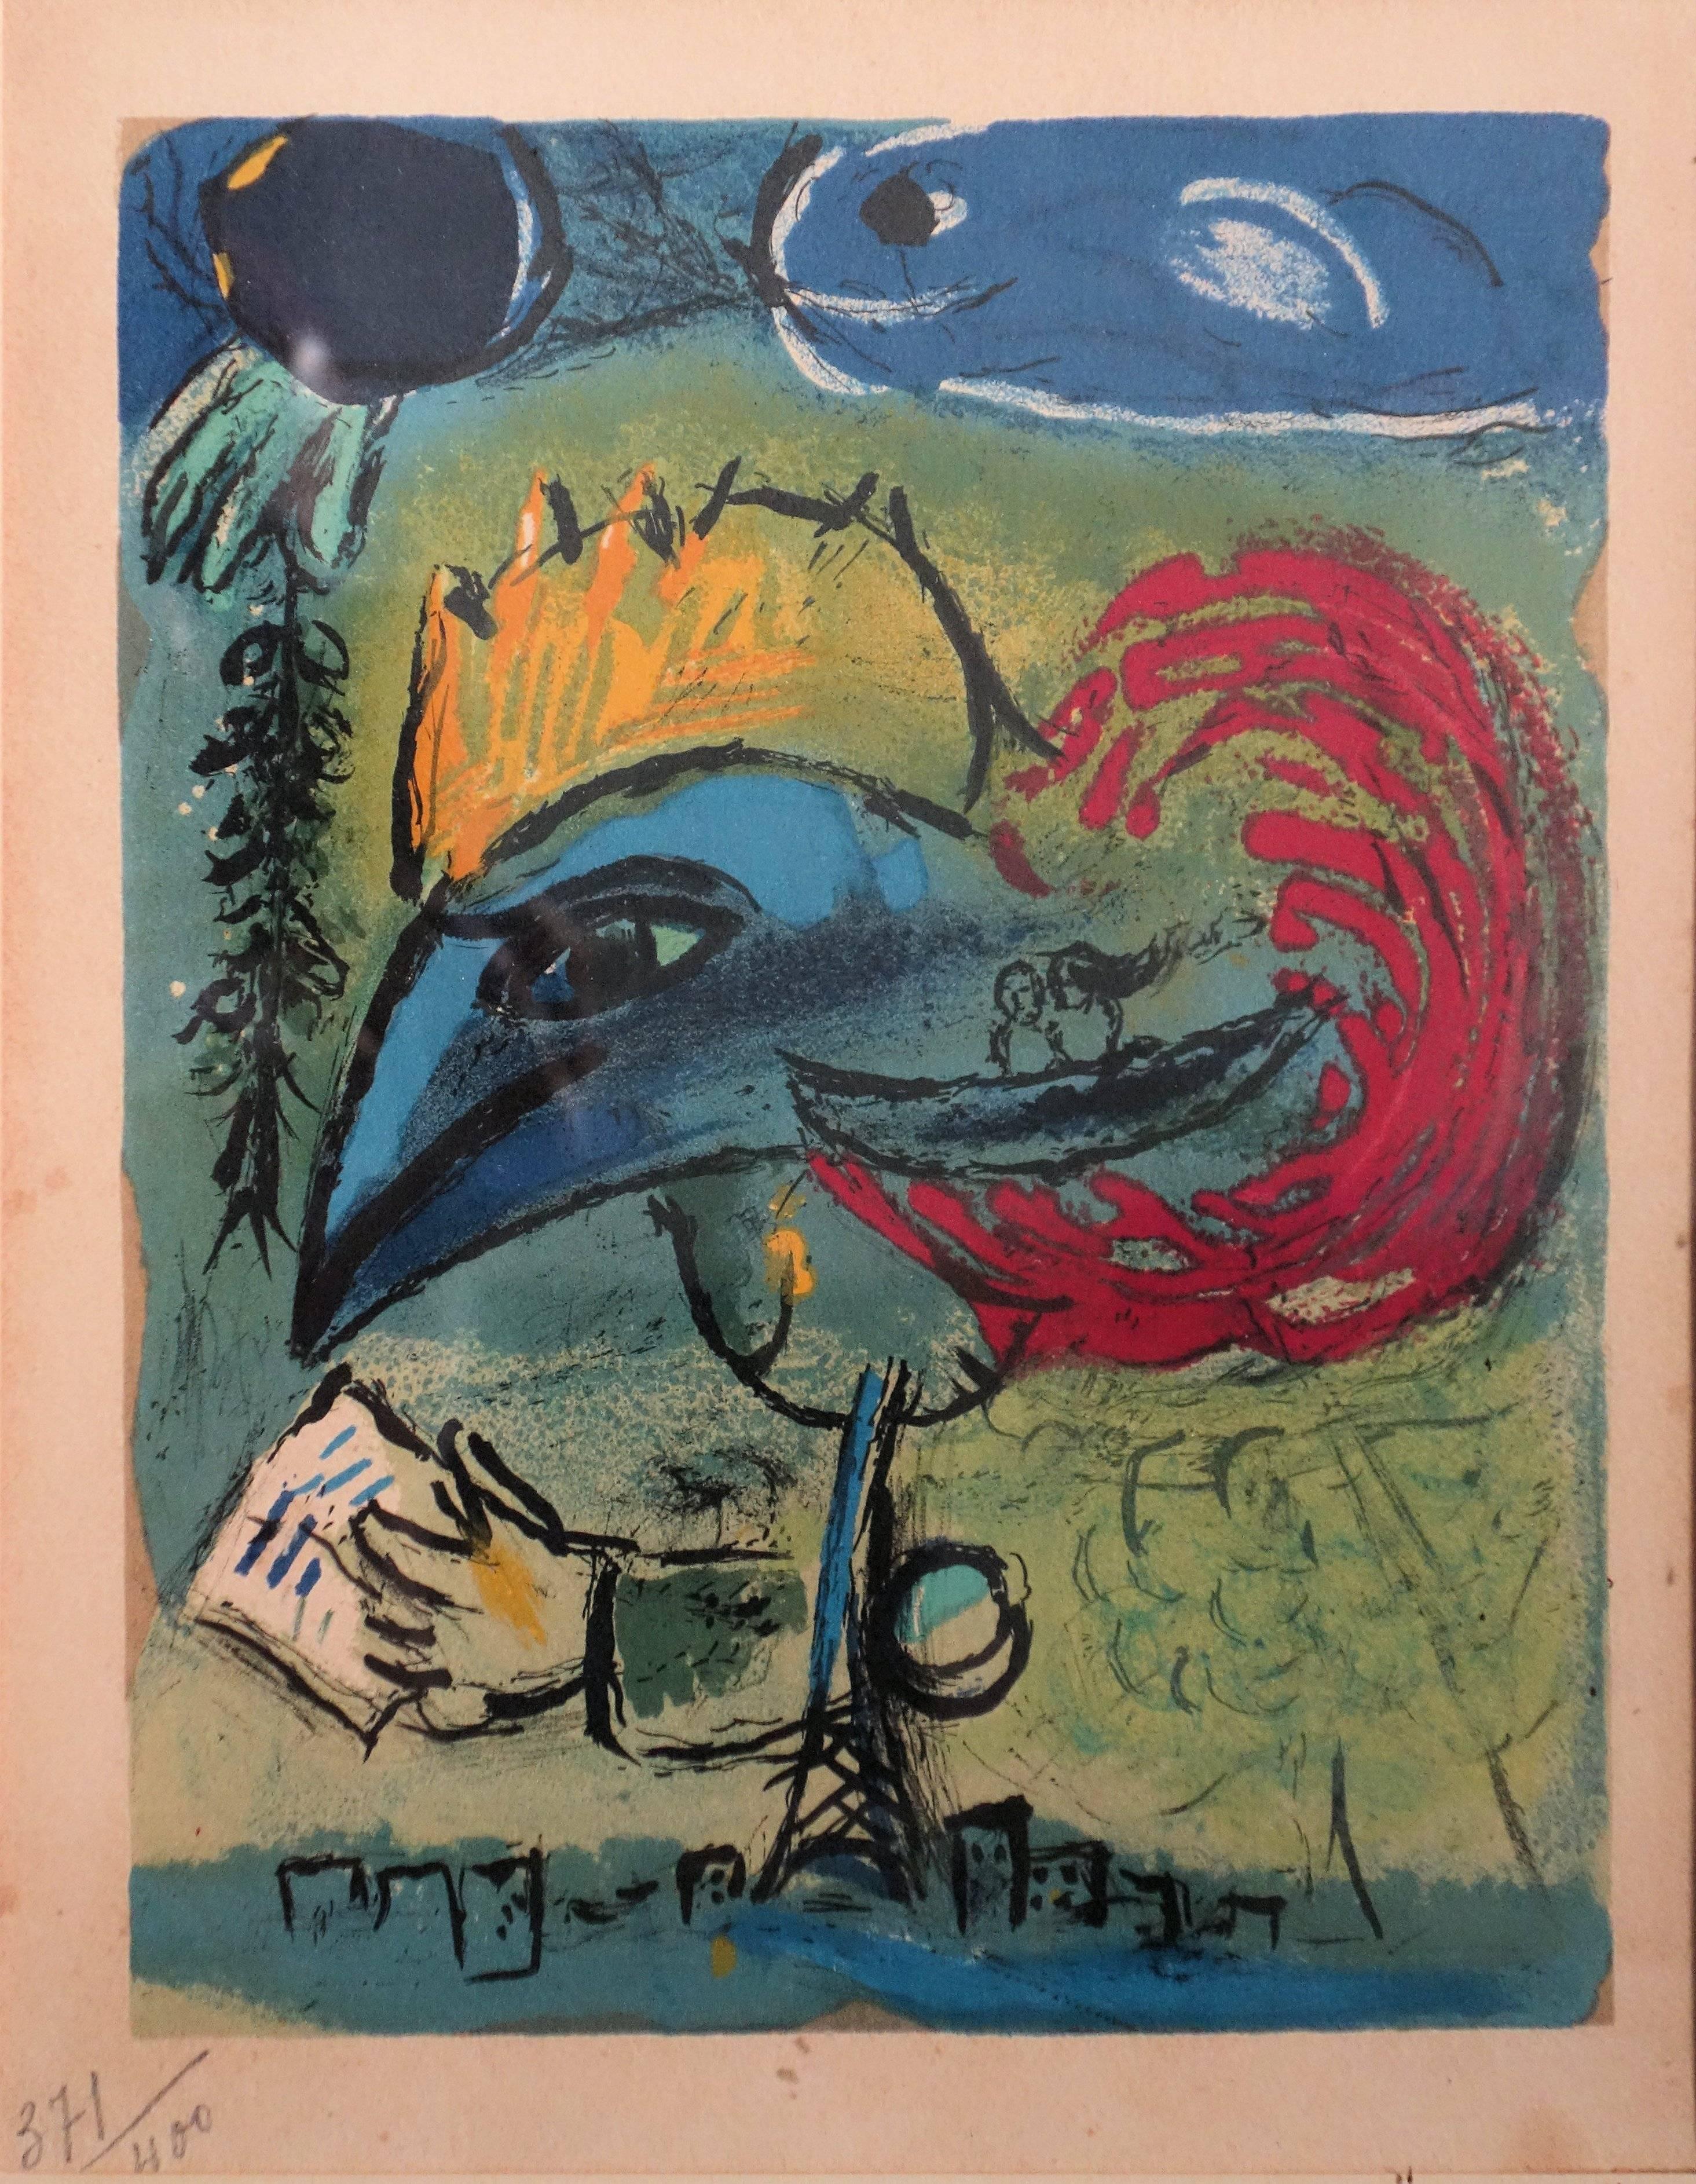 Rooster with the Eiffel Tower - Lithograph - 400 ex - 1952 - Print by (after) Marc Chagall